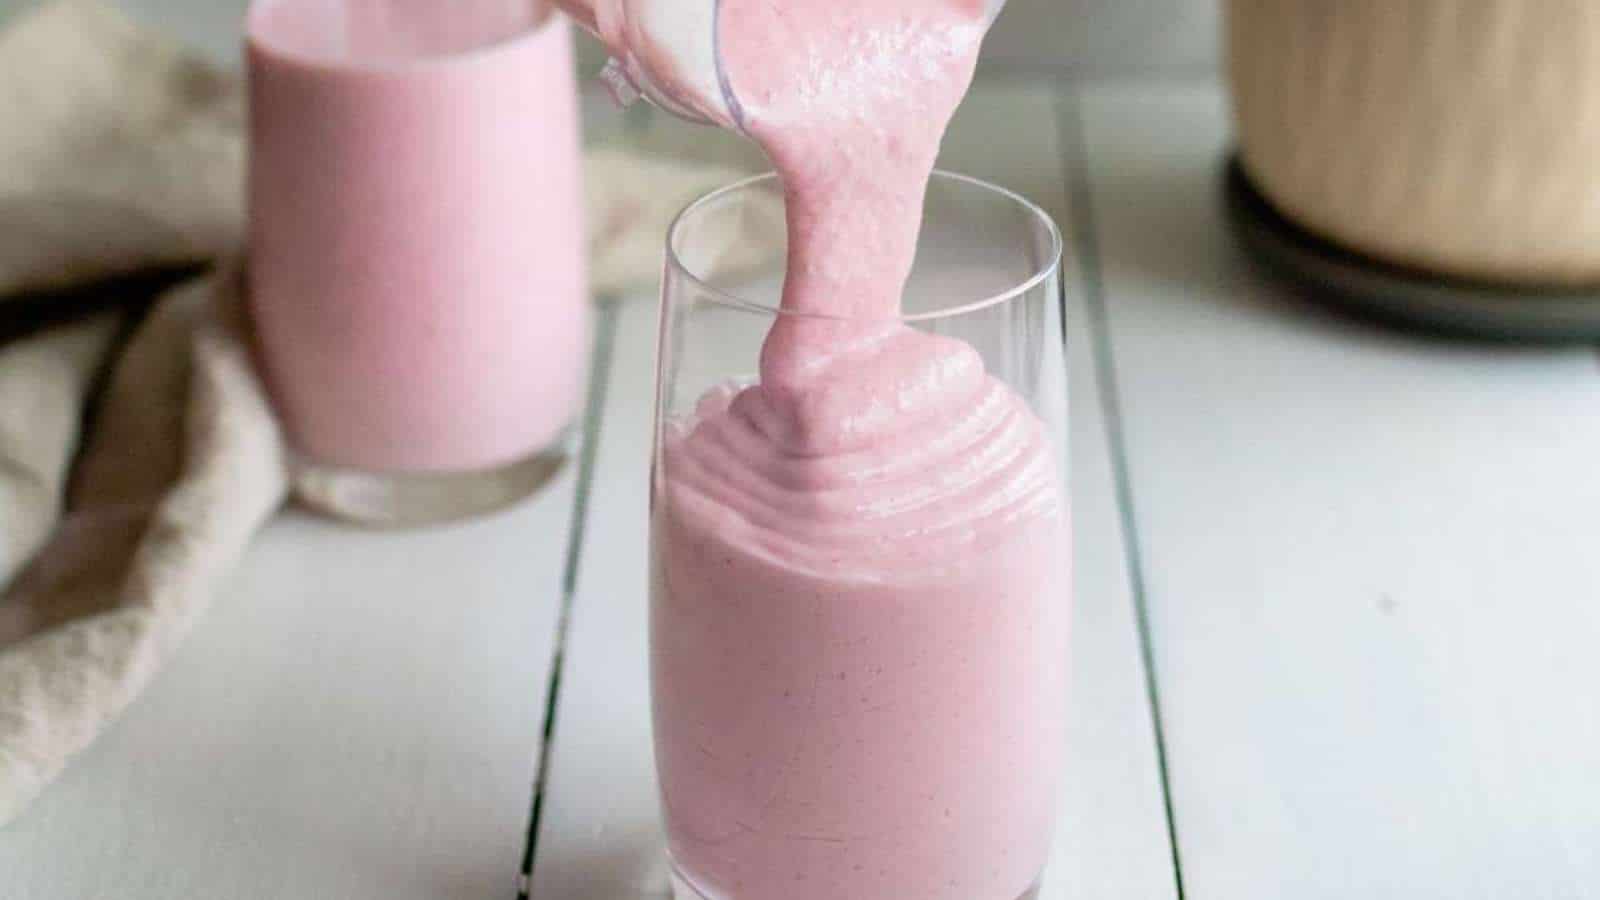 A pink smoothie being poured into a glass.